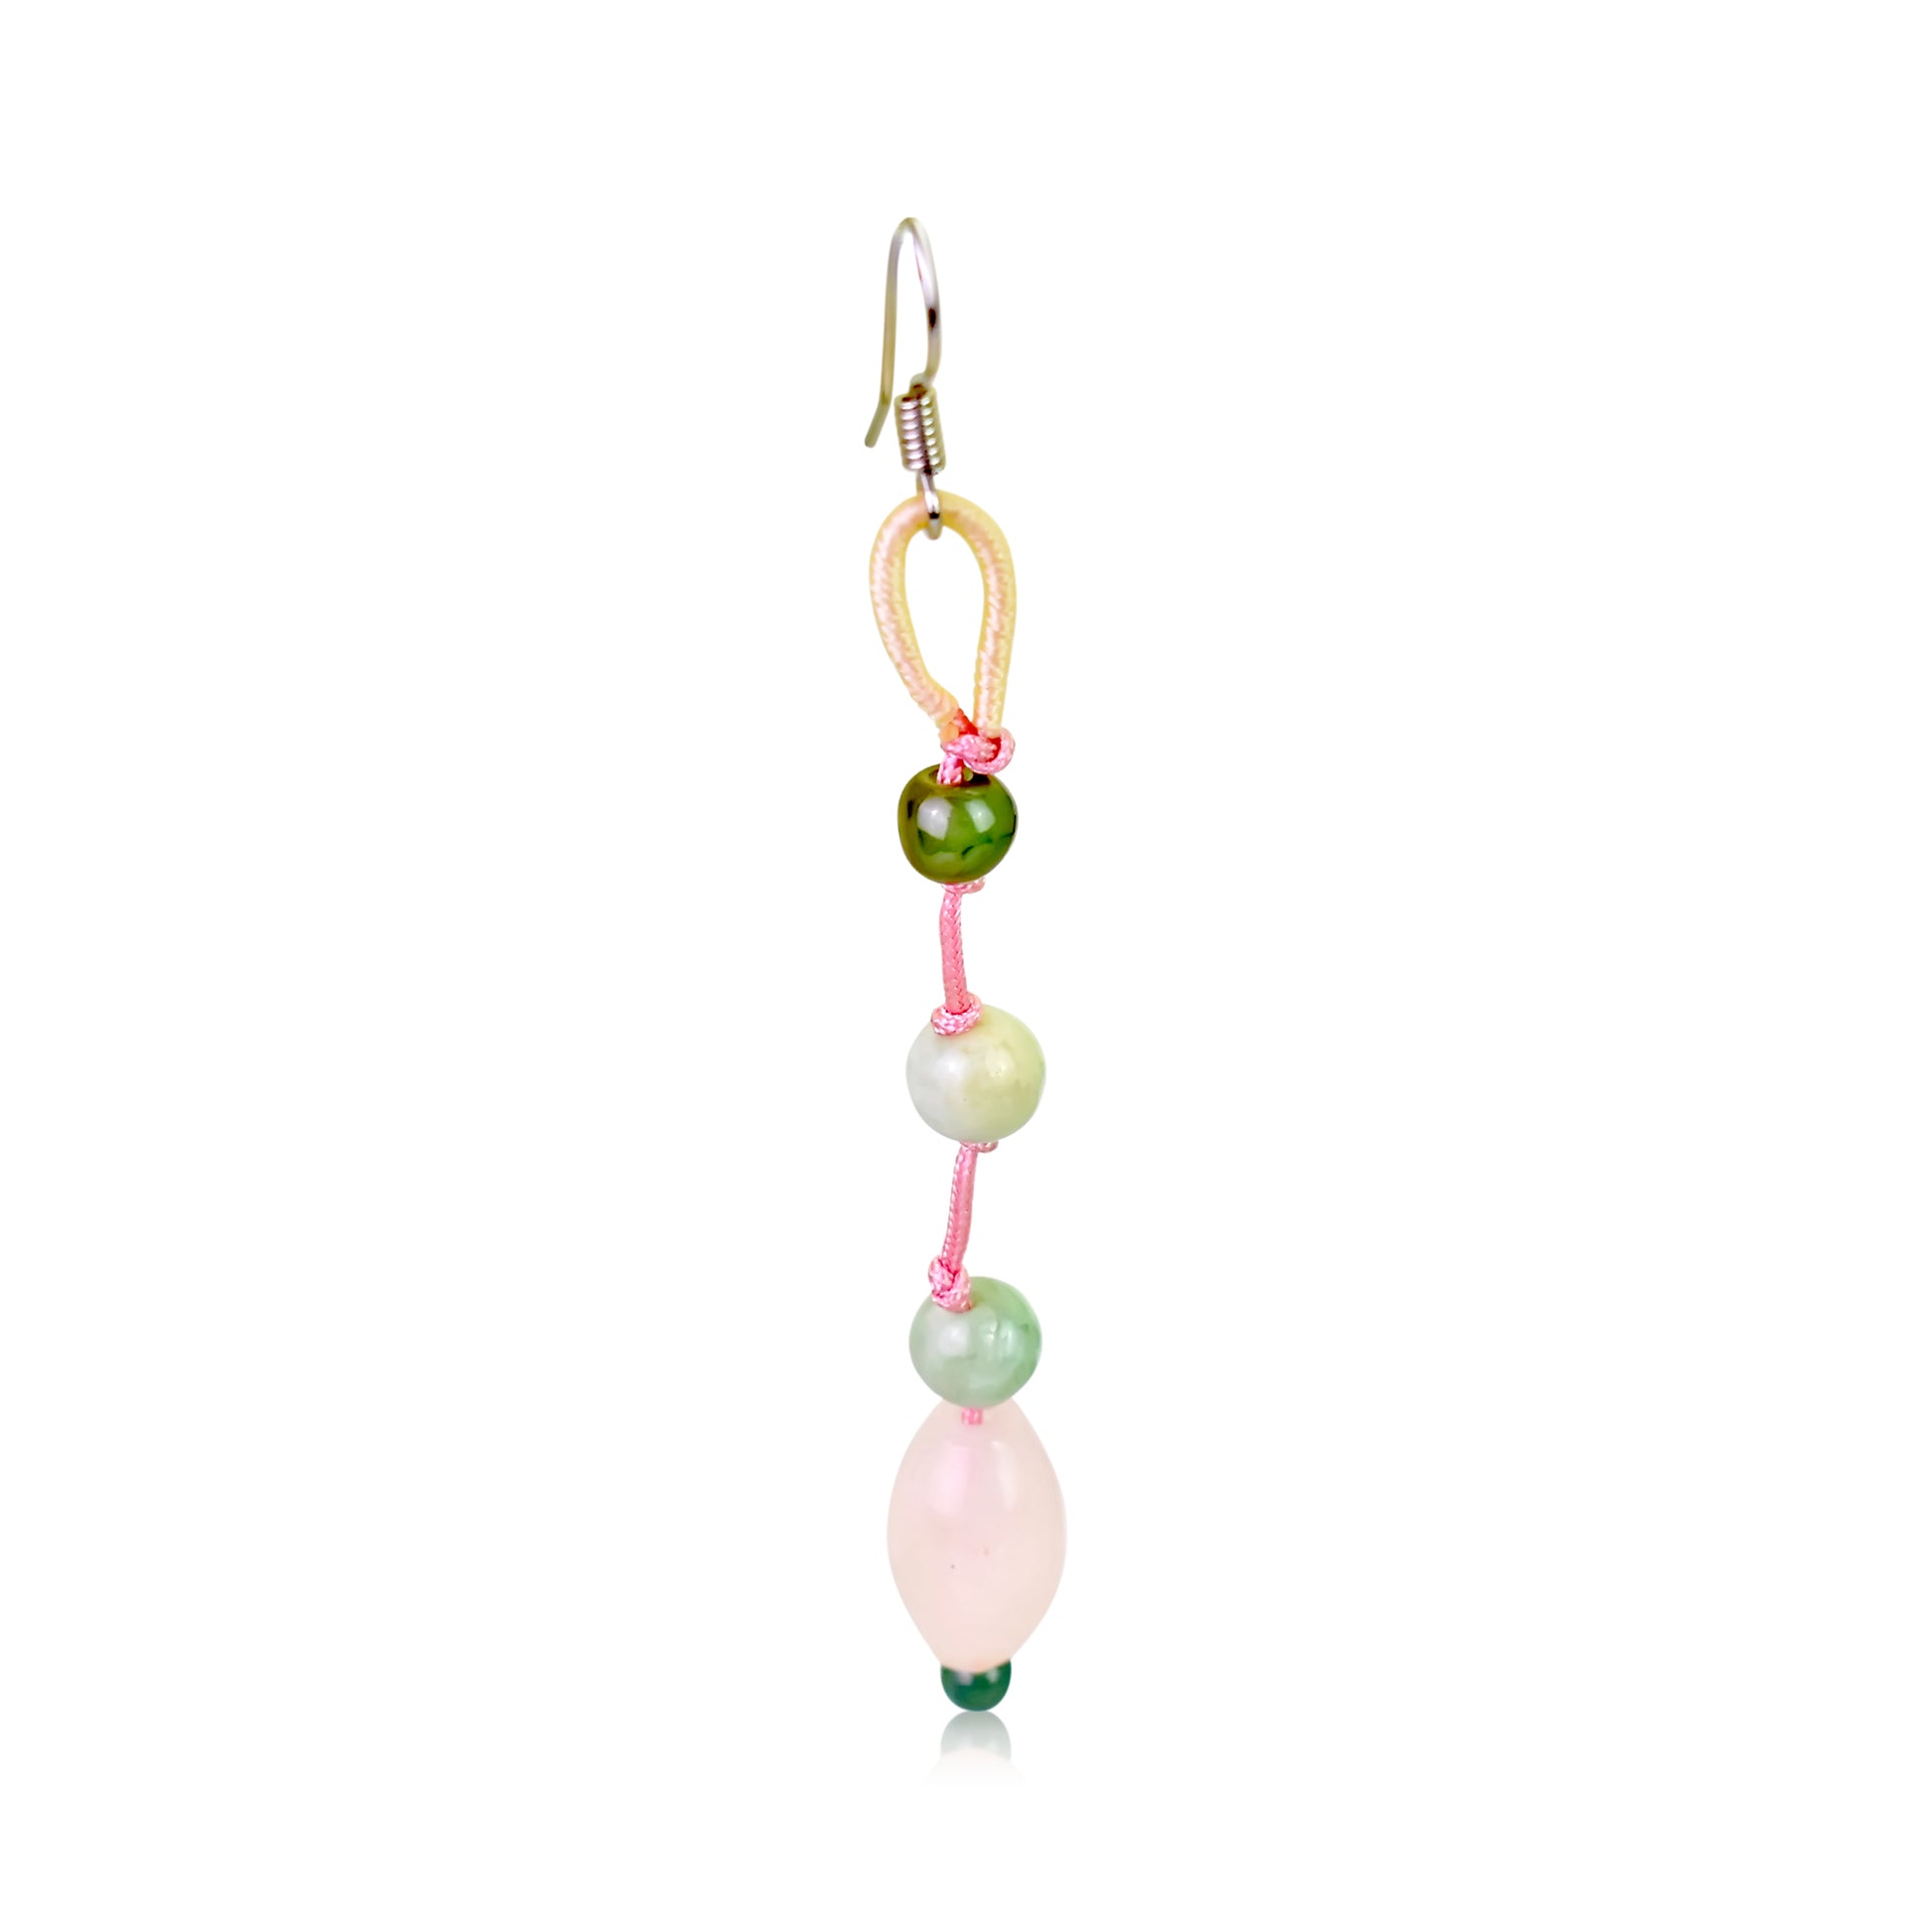 Add some Sparkle to Your Look with Cute Oblong Rose Quartz Earrings made with Pink Cord